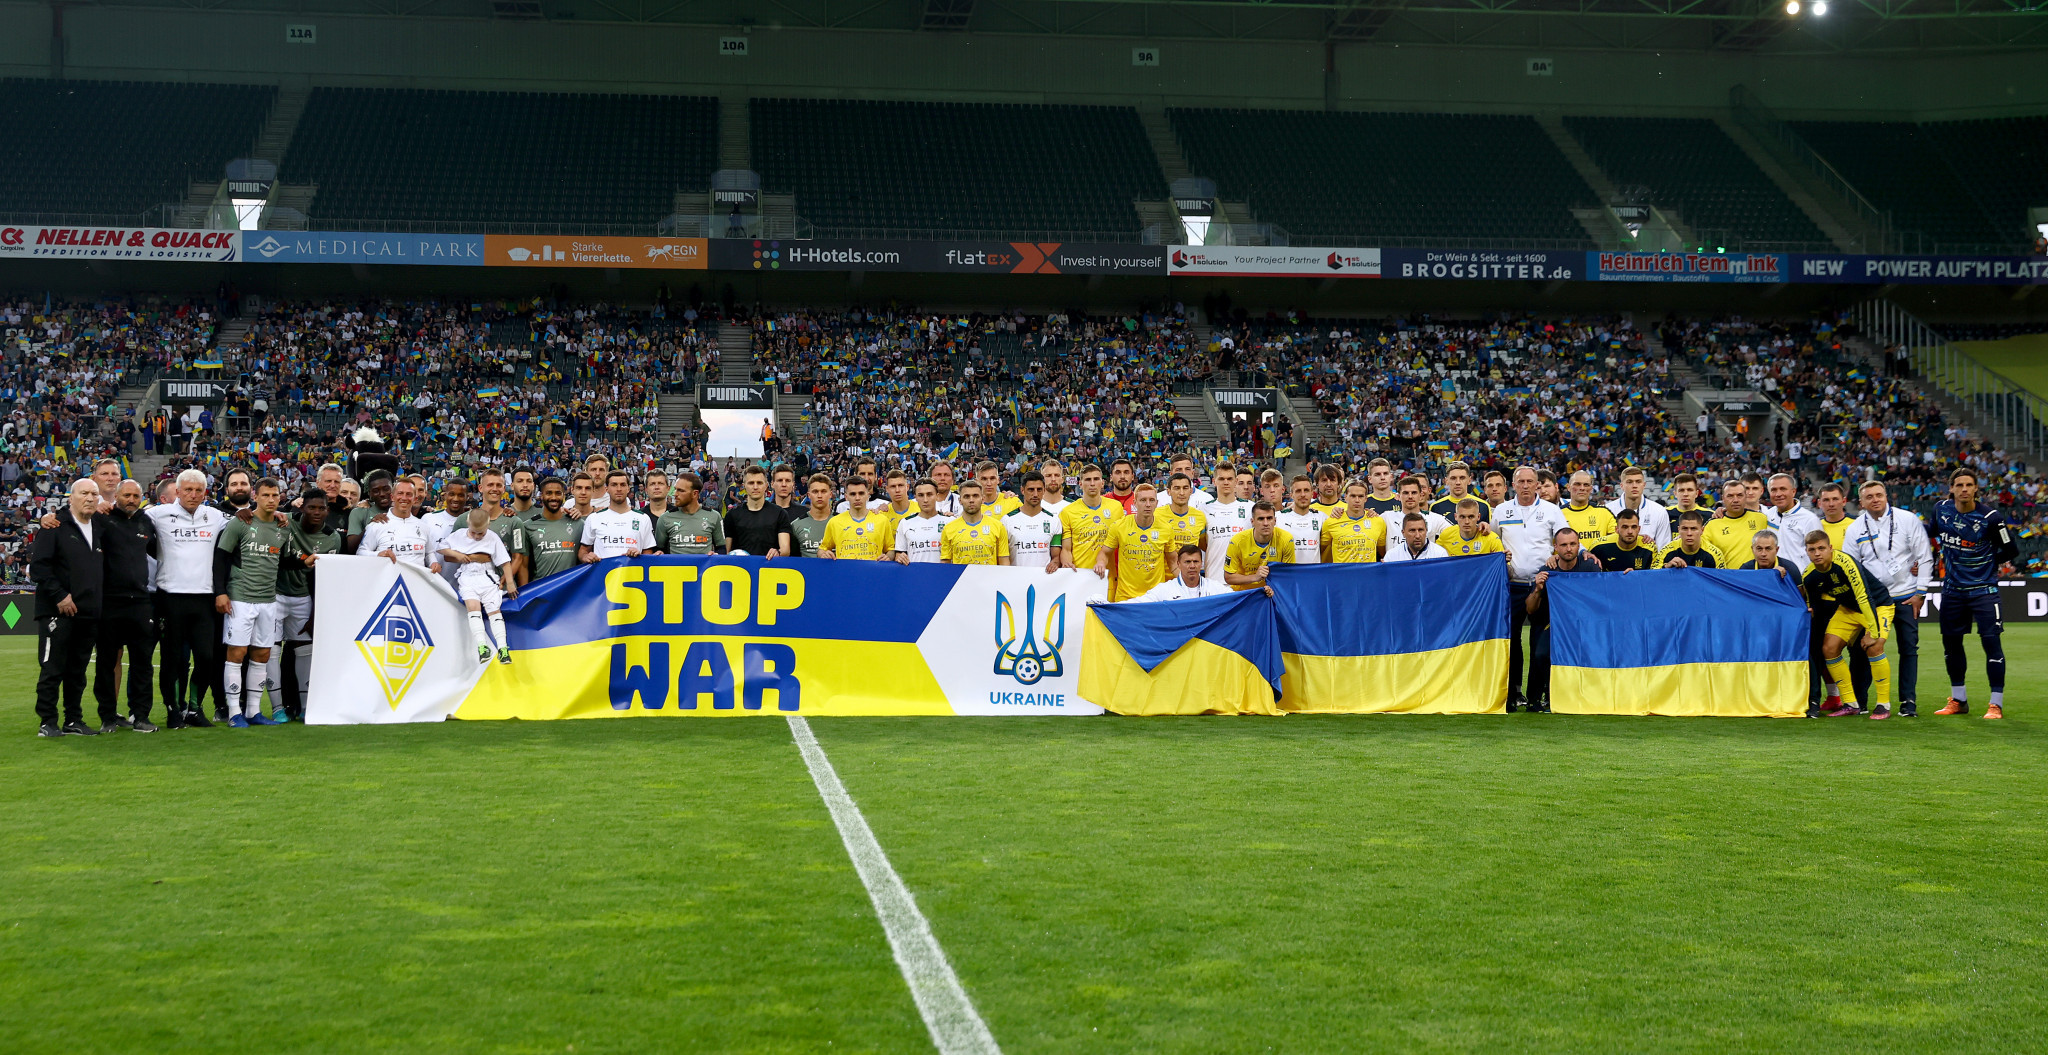 Players from Borussia Mönchengladbach and Ukraine posed for a photo with a "Stop War" banner before kick-off  ©Getty Images